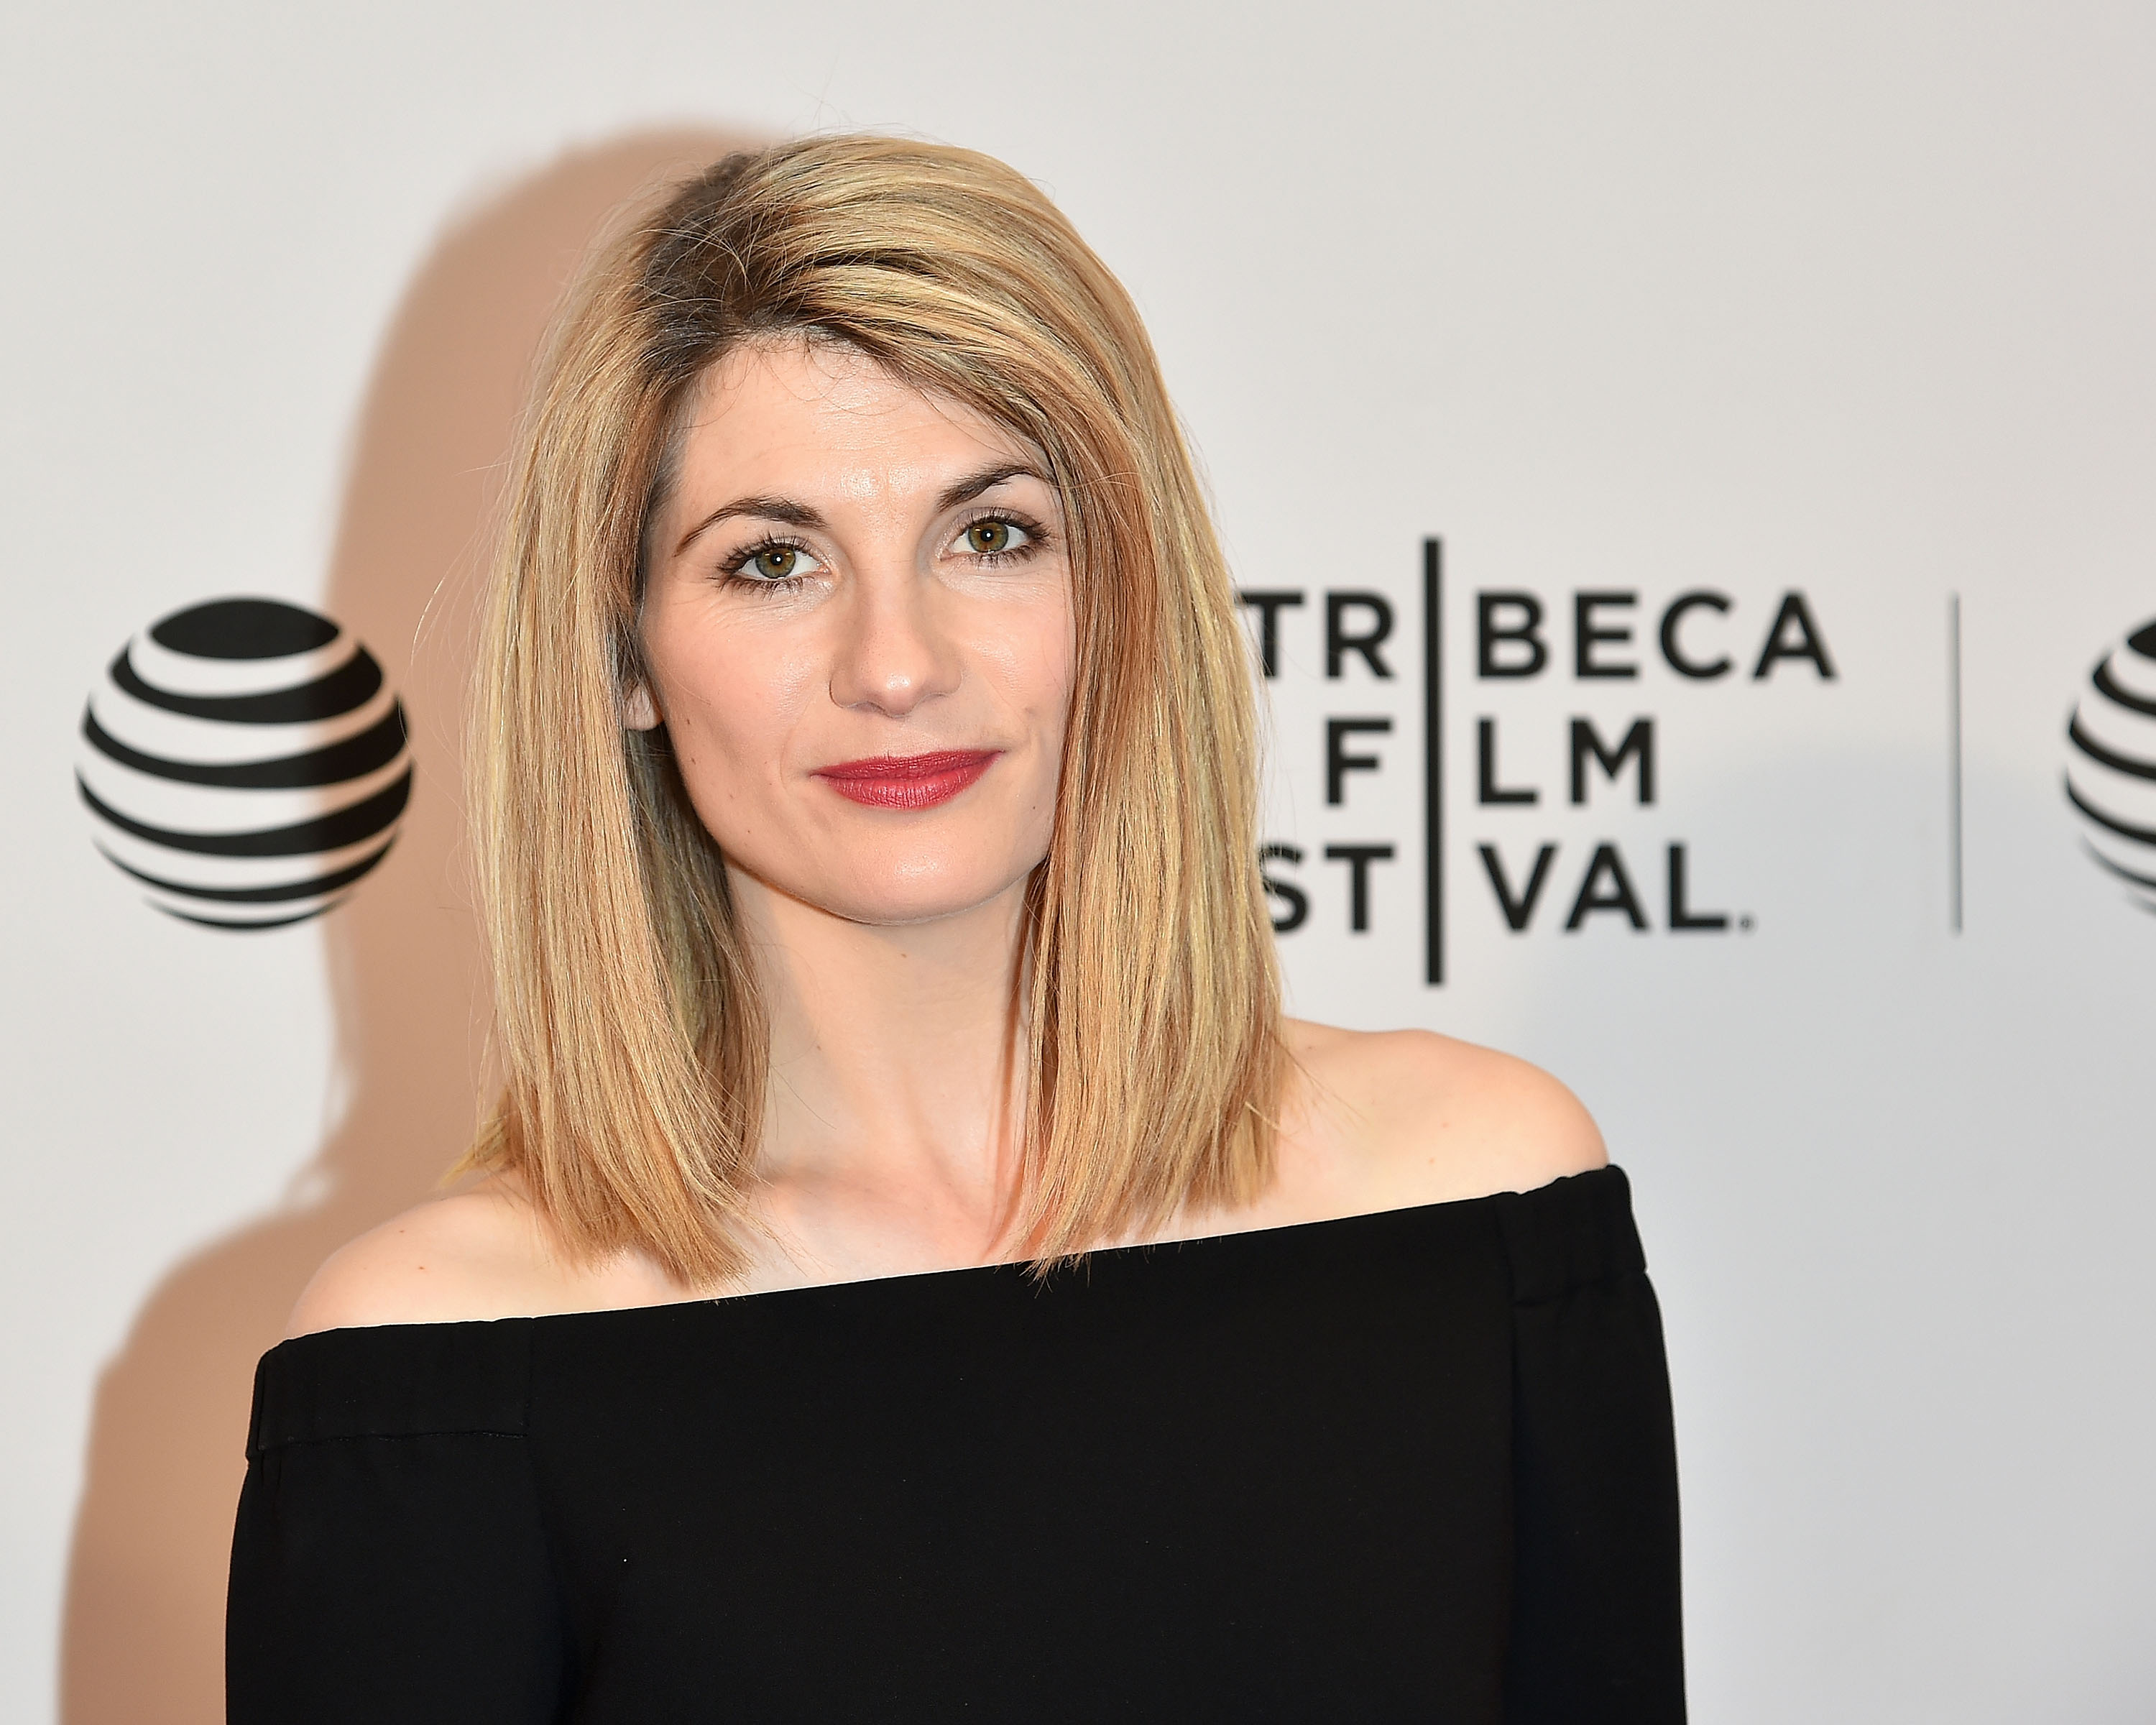 Actress Jodie Whittaker attends the "Adult Life Skills" Premiere during the 2016 Tribeca Film Festival at Chelsea Bow Tie Cinemas on April 17, 2016 in New York City.  (Photo by Ben Gabbe/Getty Images for Tribeca Film Festival) (Ben Gabbe&mdash;Getty Images for Tribeca Film Fe)